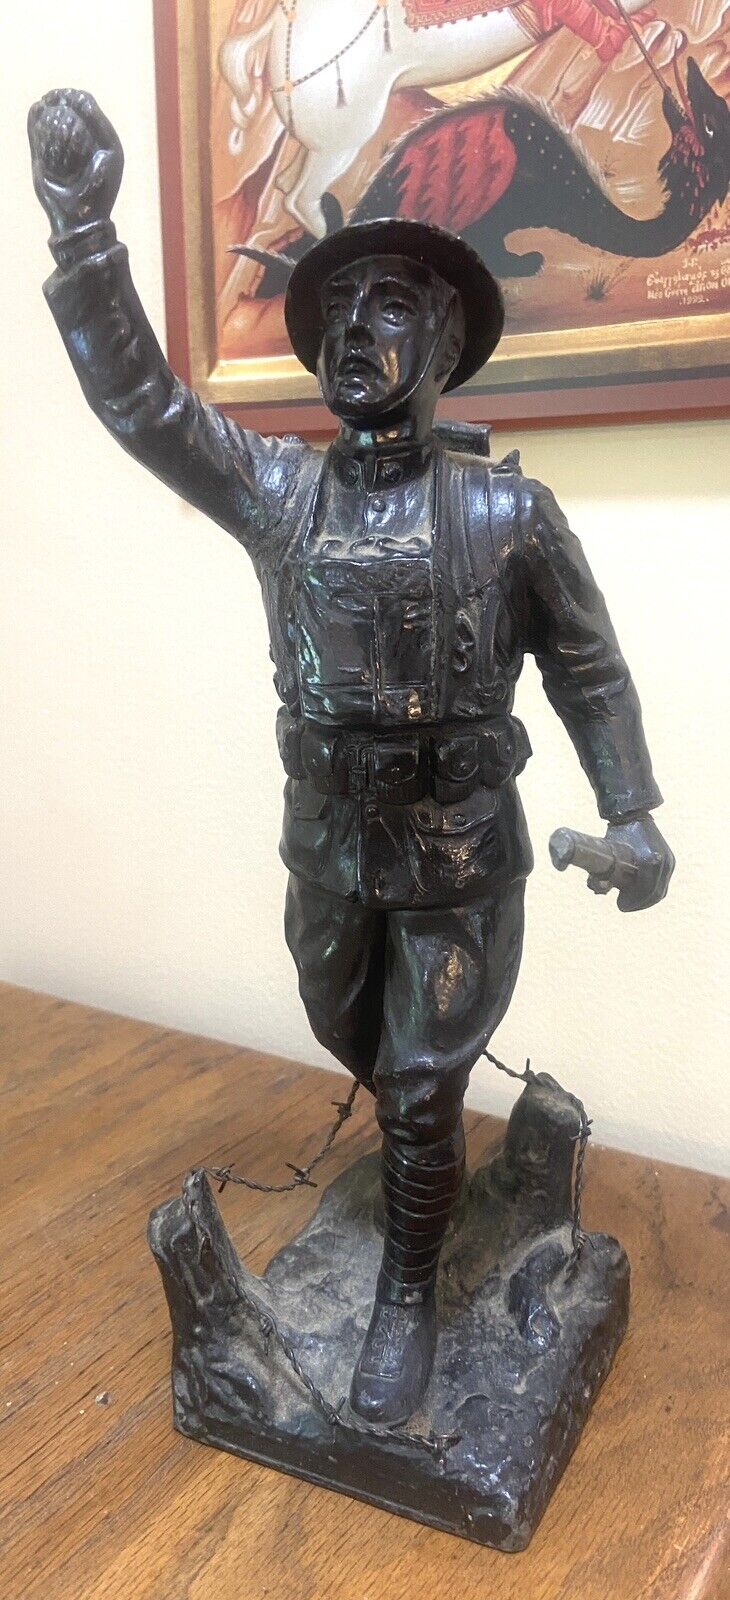 WWI Spirit of the American Doughboy E.M. VIQUESNEY Sculpture 1921-1925